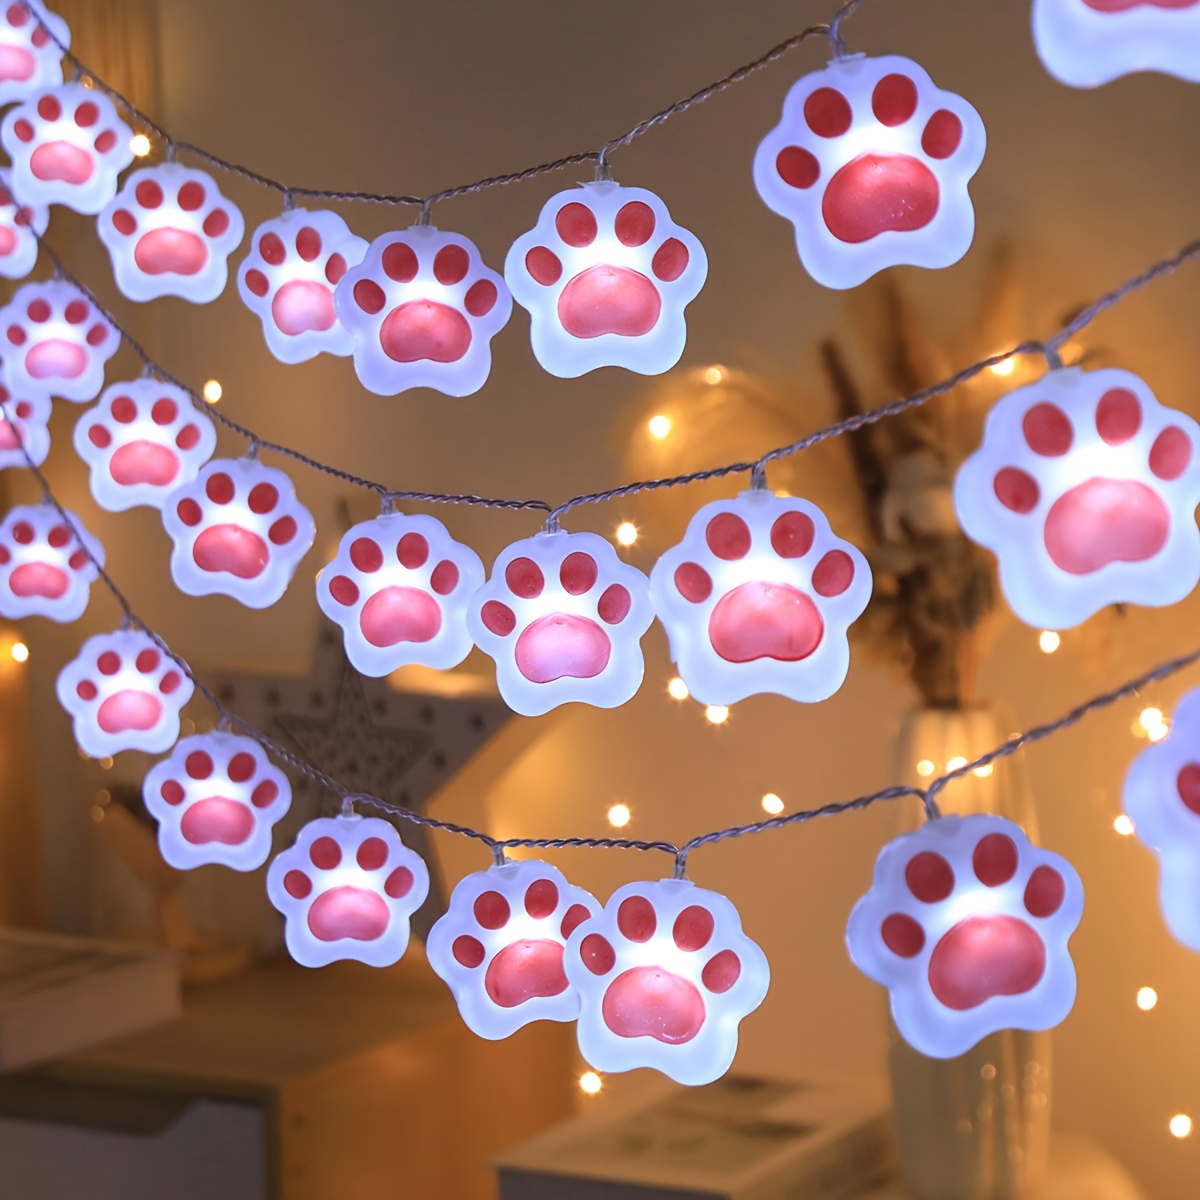 

1pc Cute Animal Paw String Lights, 4.92ft 10 Led Battery Operated, Bedroom, Birthday Decoration, Indoor Outdoor Lights, Wedding, Christmas, Summer Yard, Party Supplies (battery Not Included)